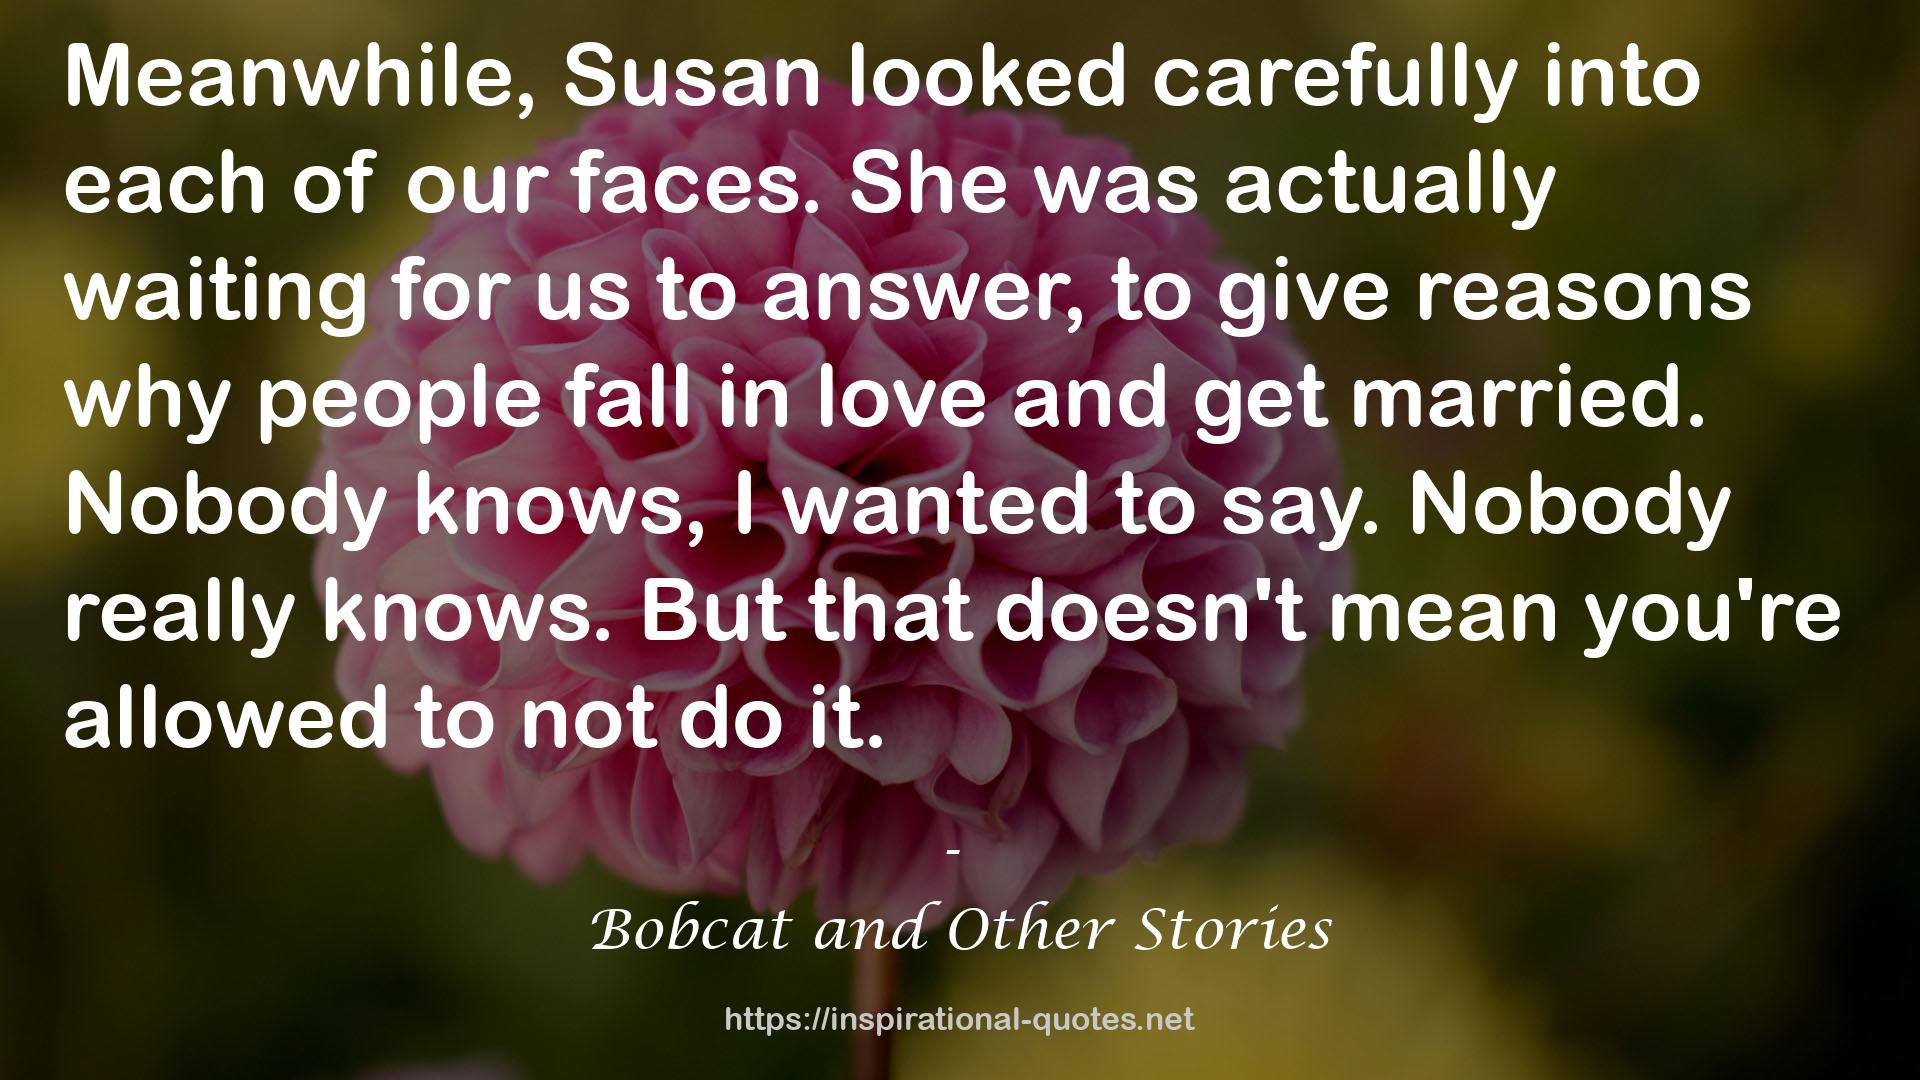 Bobcat and Other Stories QUOTES